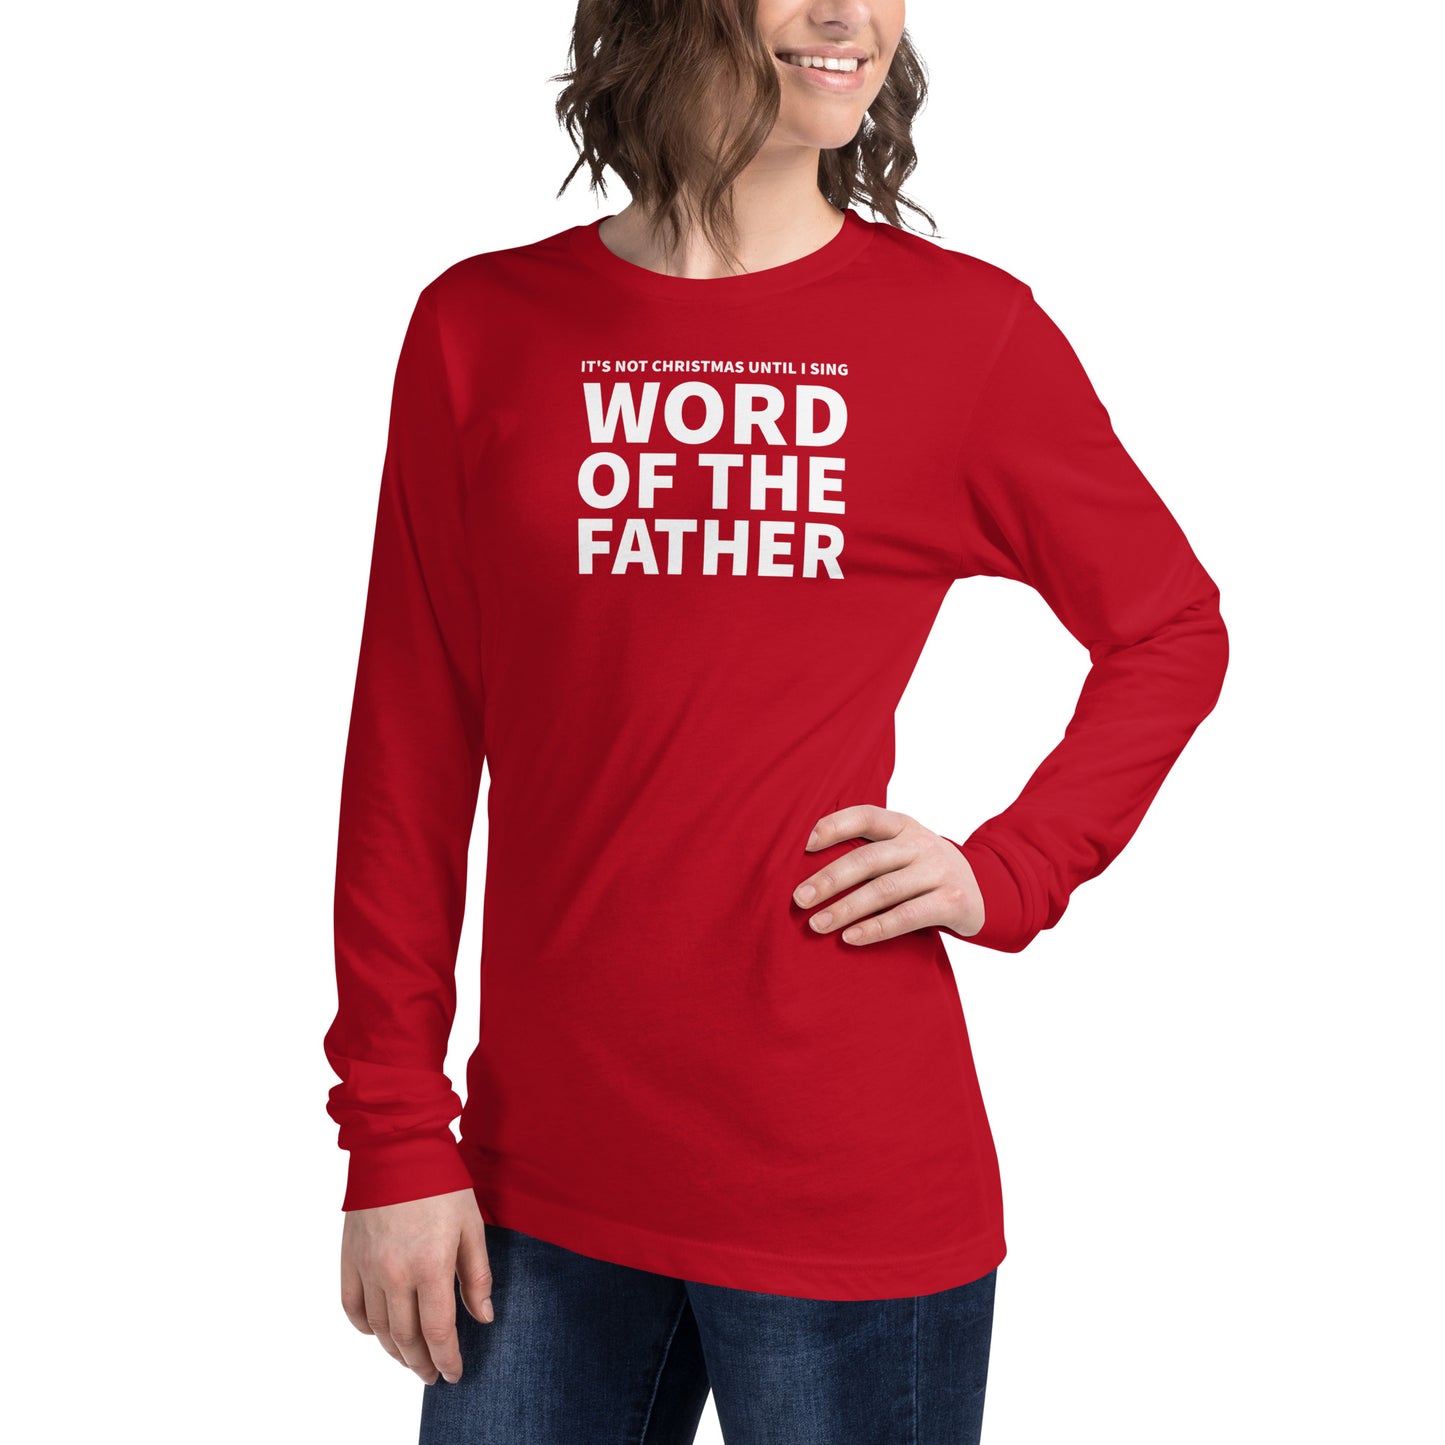 Word of the Father - Christmas Unisex Long Sleeve Tee